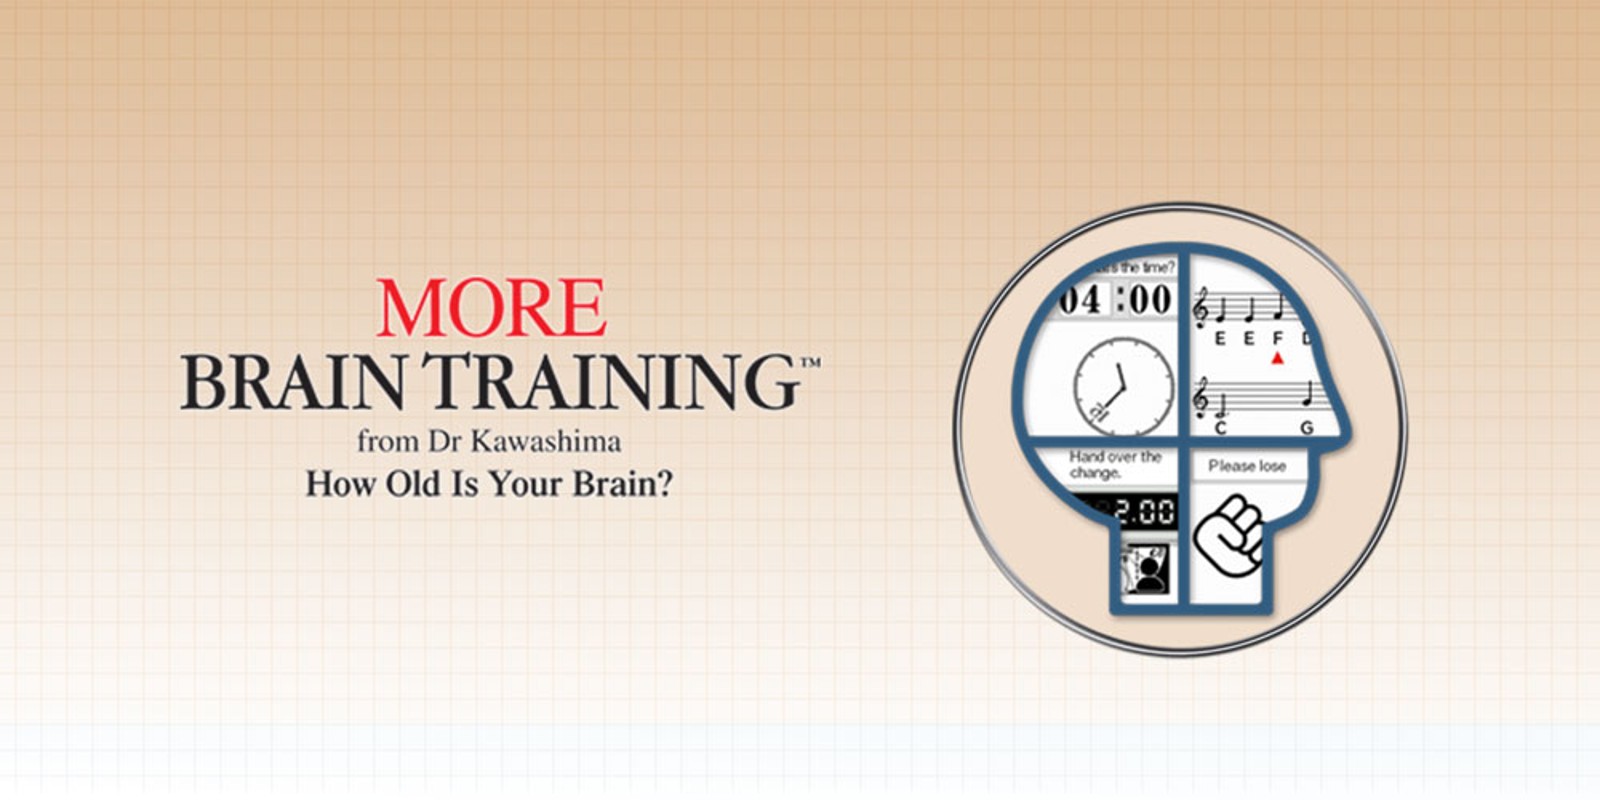 More Brain Training from Dr Kawashima: How Old Is Your Brain? | Nintendo DS | Games ...1600 x 800